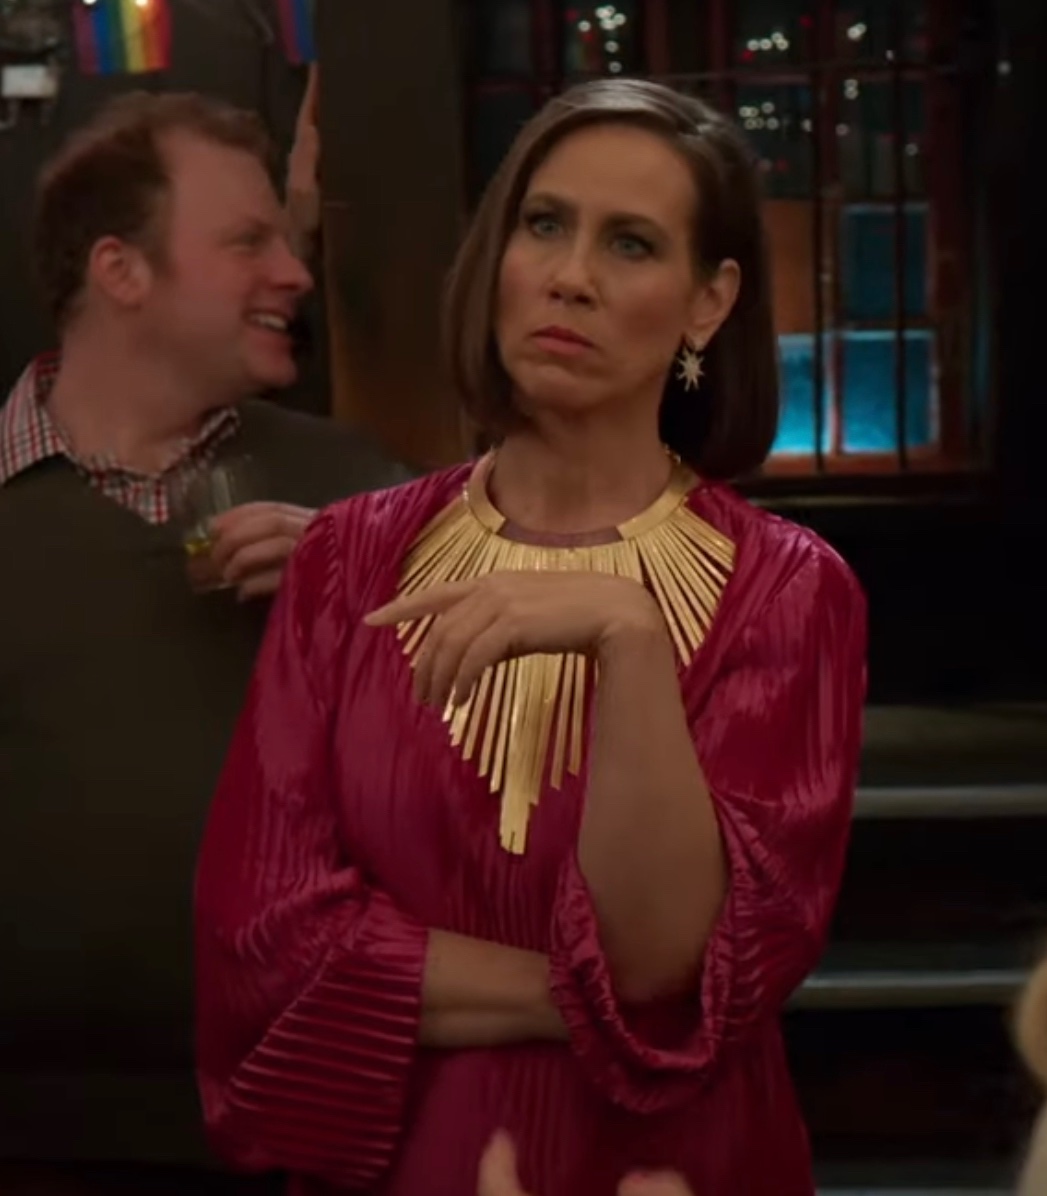 I was Watching  @YoungerTV on @Hulu and realized Diana’s  outfit in this scene seemed familiar….  #younger  #kuzco #emperorsnewgroove #disney #Hulu